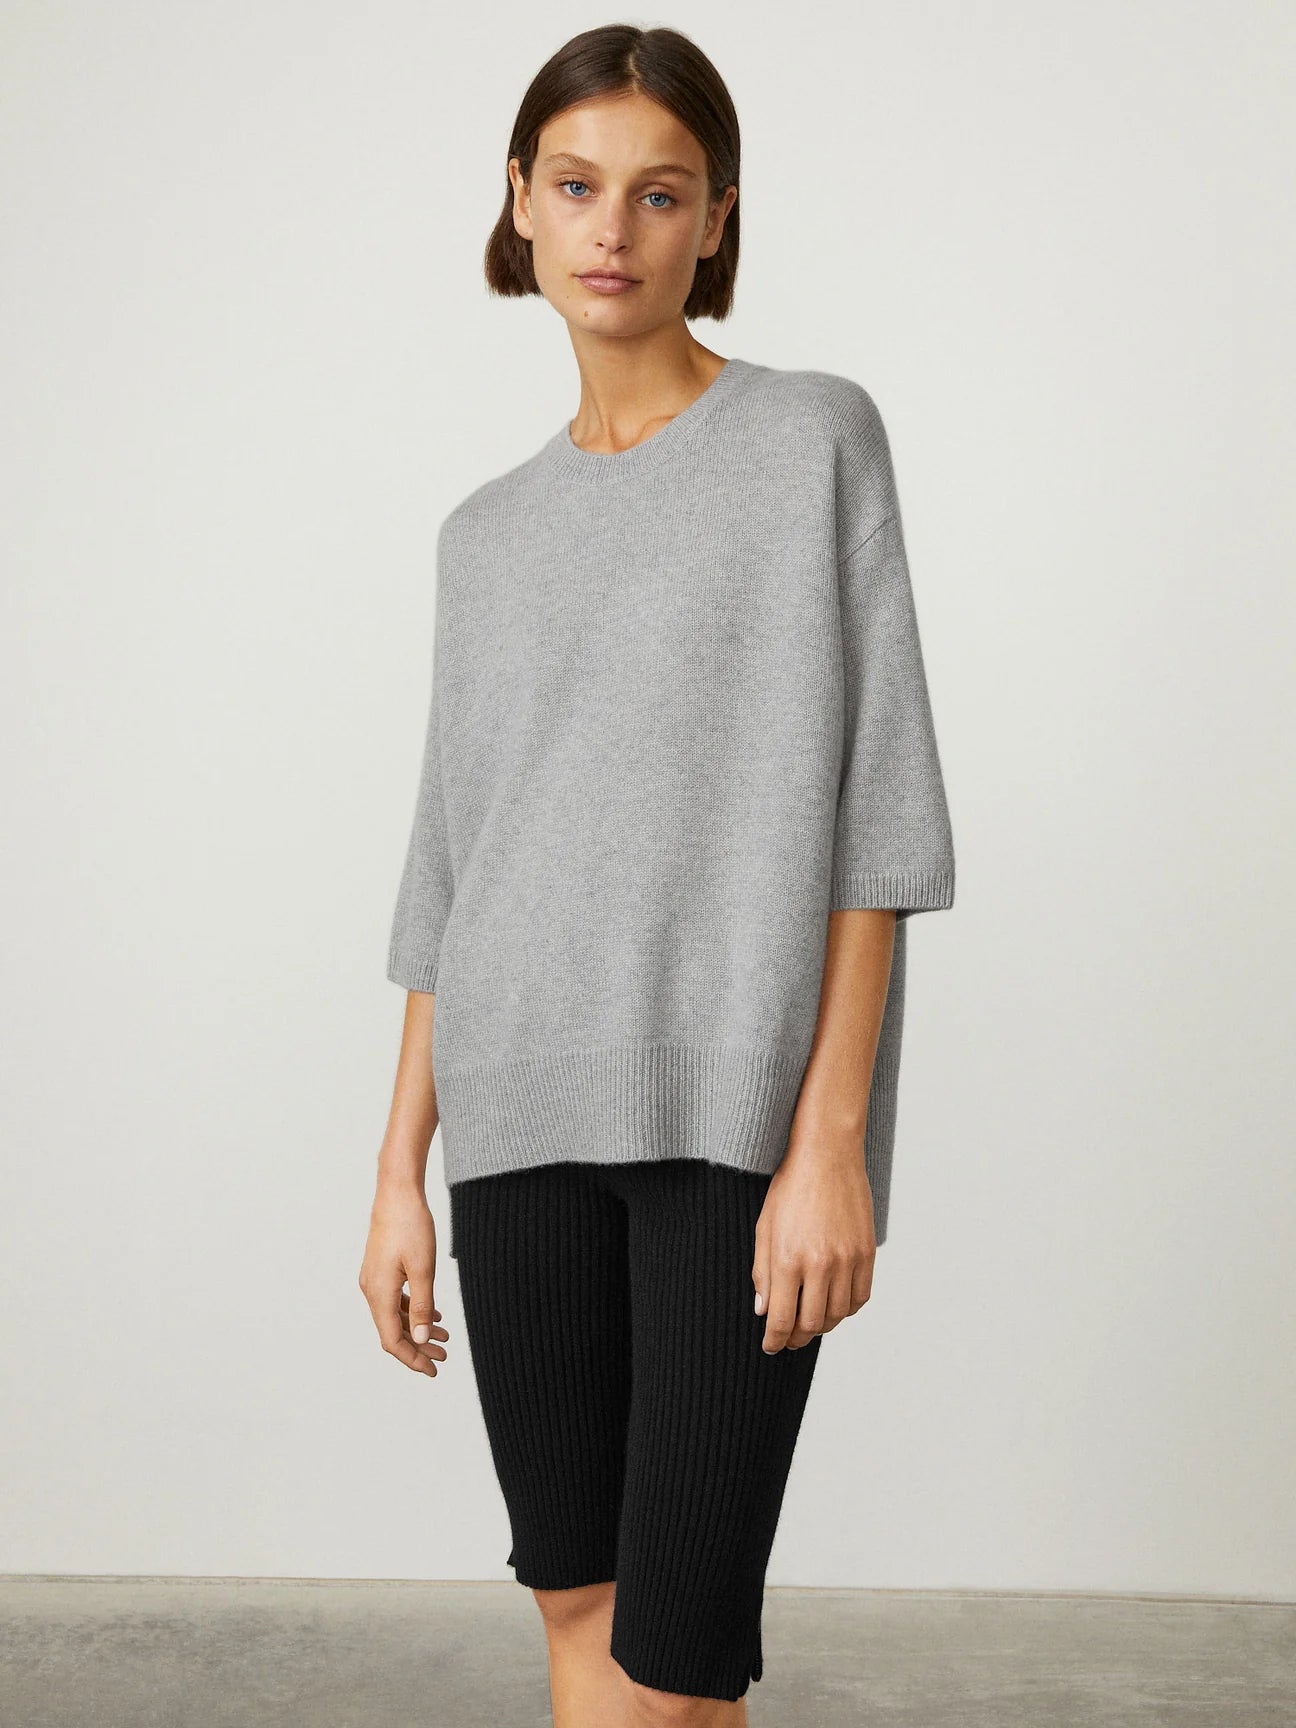 Lisa Yang Camille Cashmere Sweater